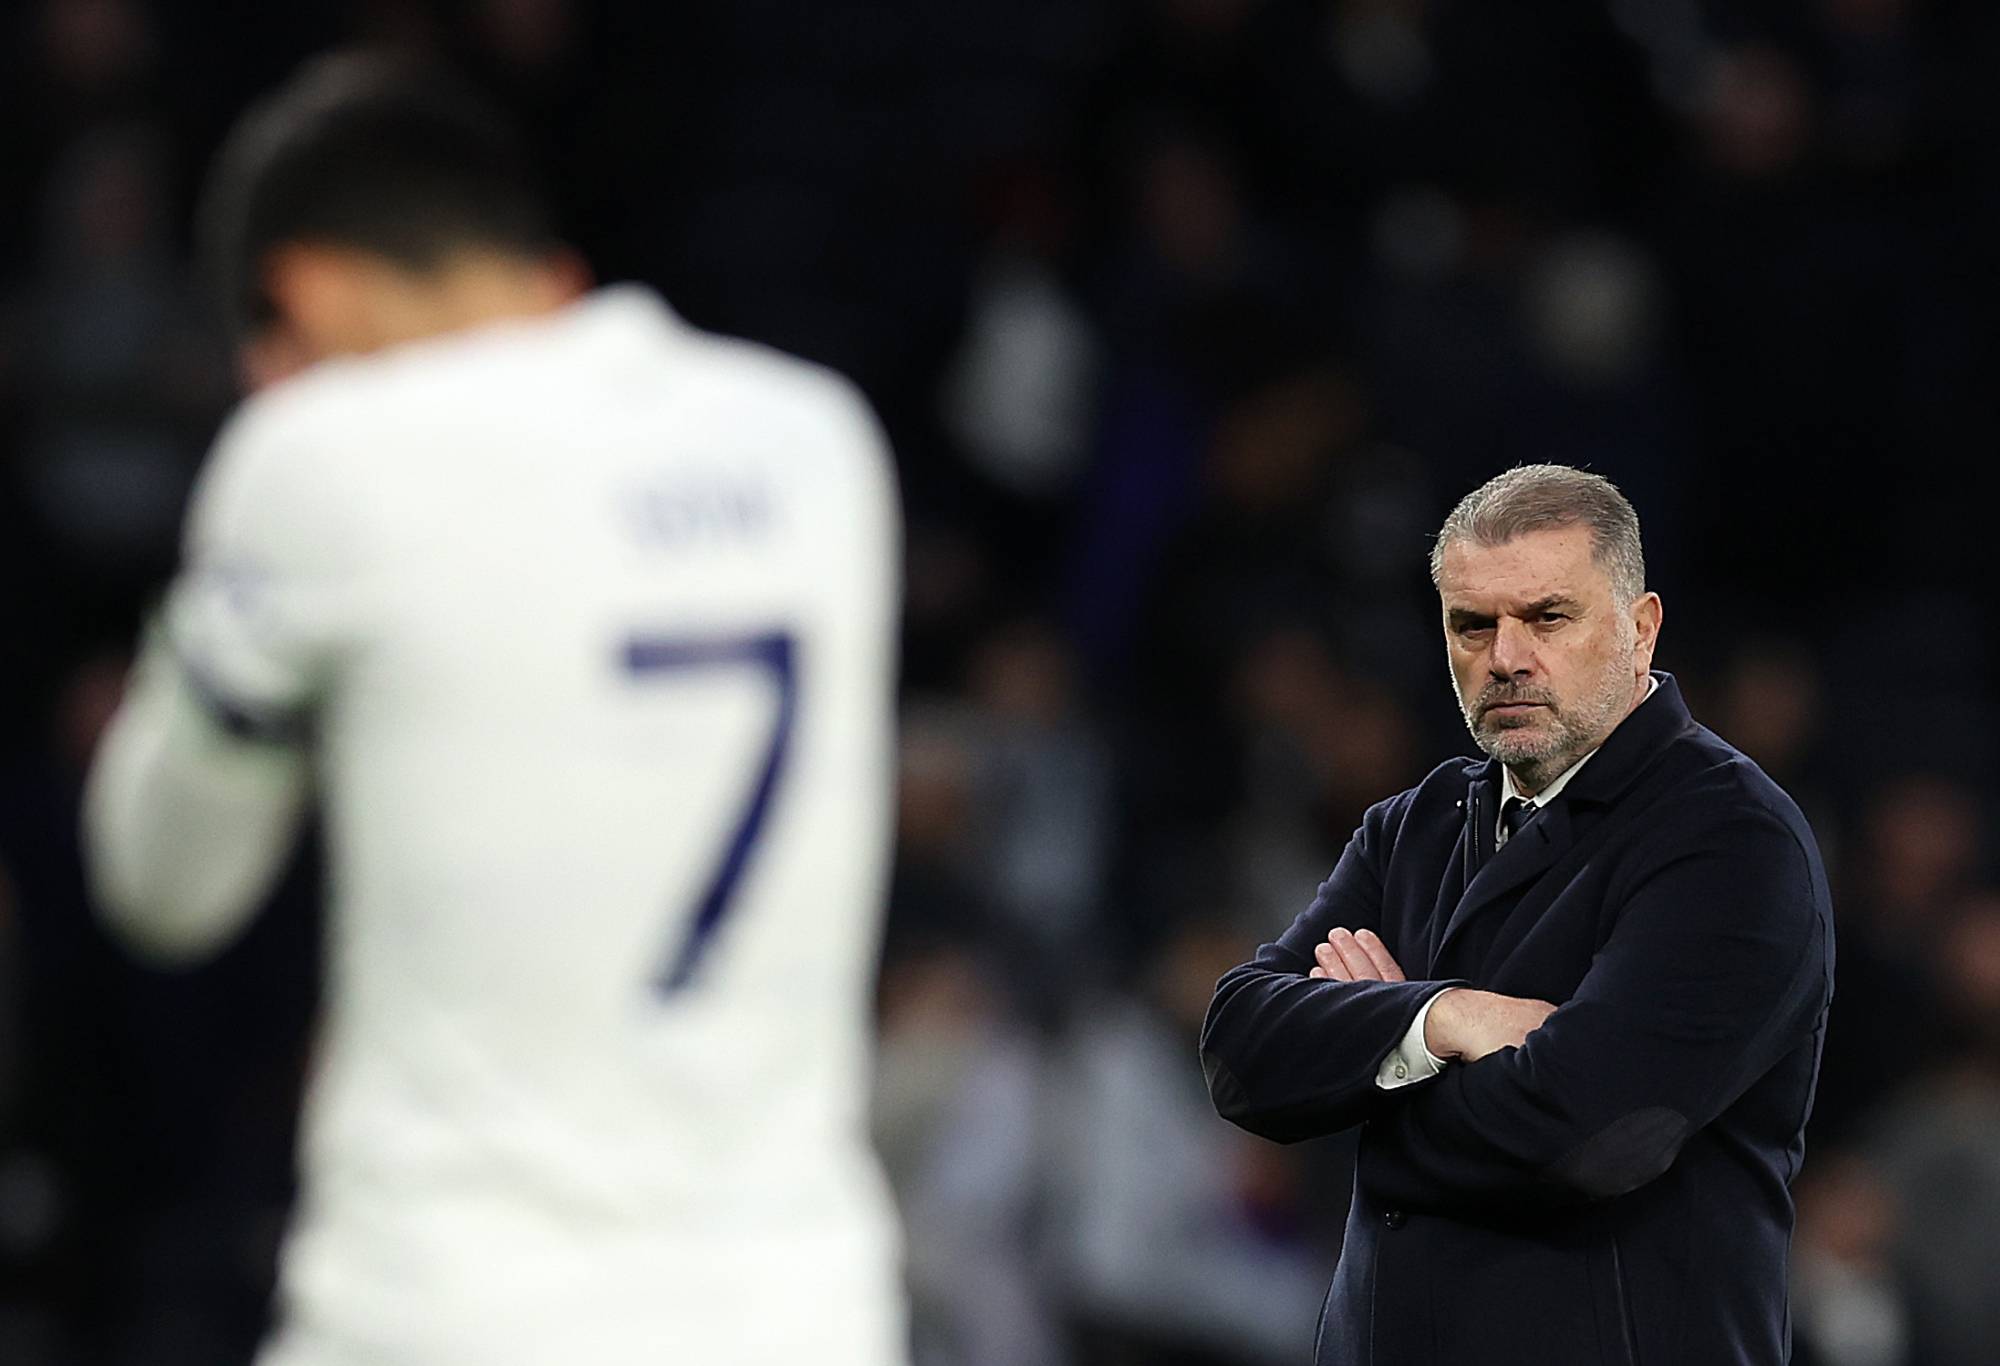 LONDON, ENGLAND - FEBRUARY 17: Ange Postecoglou, Manager of Tottenham Hotspur, looks dejected as Heung-Min Son of Spurs walks off after the team's defeat during the Premier League match between Tottenham Hotspur and Wolverhampton Wanderers at Tottenham Hotspur Stadium on February 17, 2024 in London, England. (Photo by Julian Finney/Getty Images)